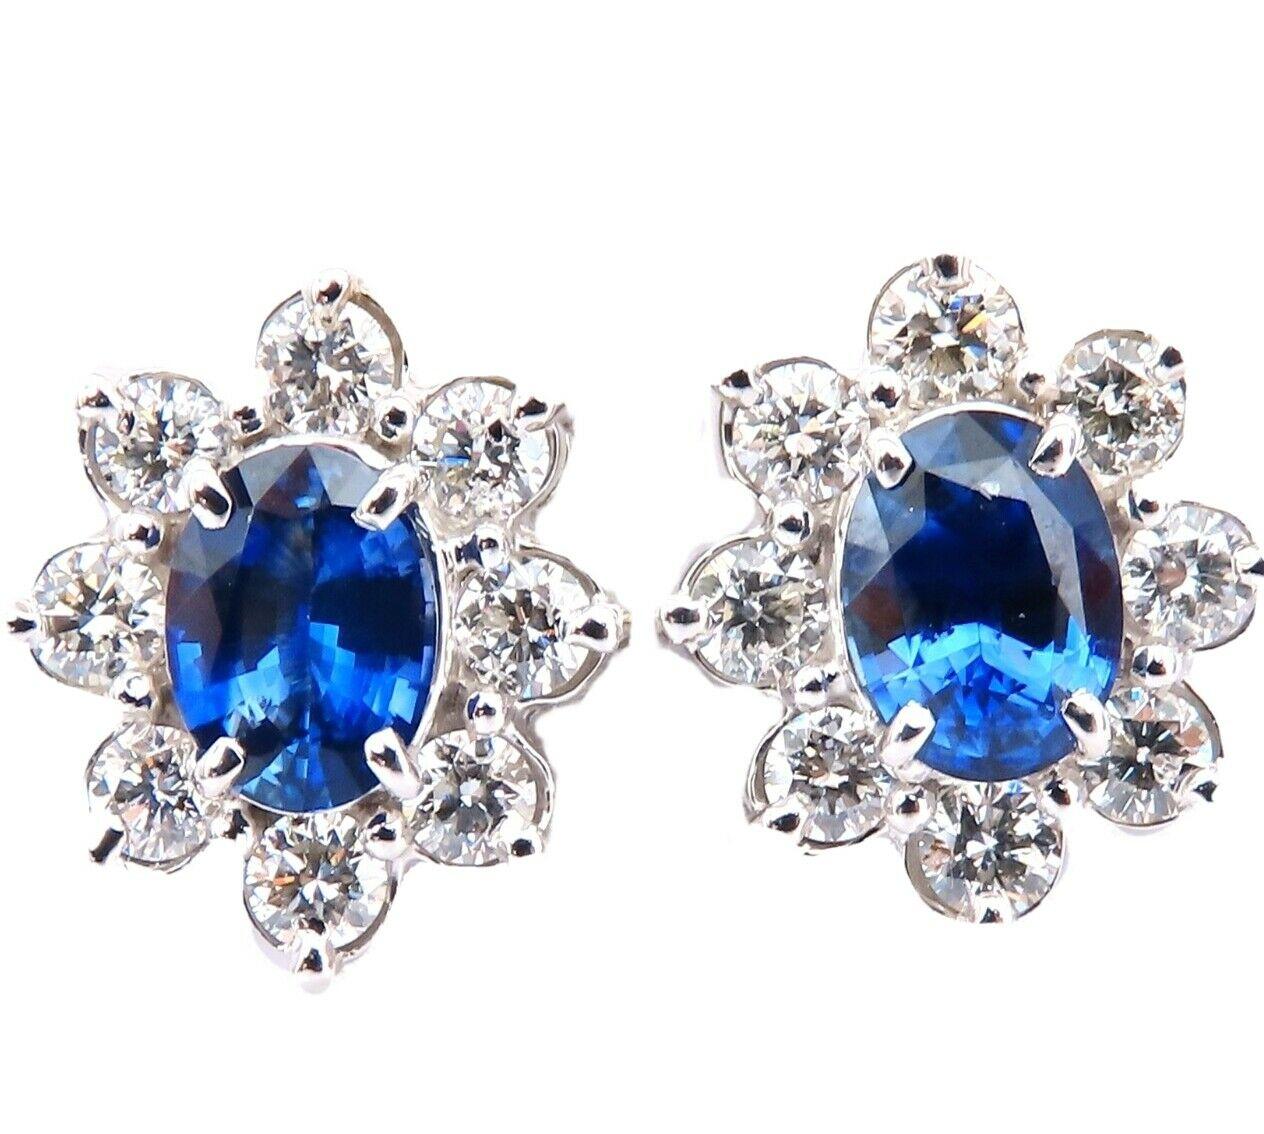 Cluster Halo prime.

2.30 carat natural oval sapphires.

Royal blue, clean clarity and transparent.

7.5 x 5.5 mm each.

1.33ct natural round diamonds.

G color vs2 clarity

14kt white gold 6 grams.

$12,000 appraisal certificate will accompany